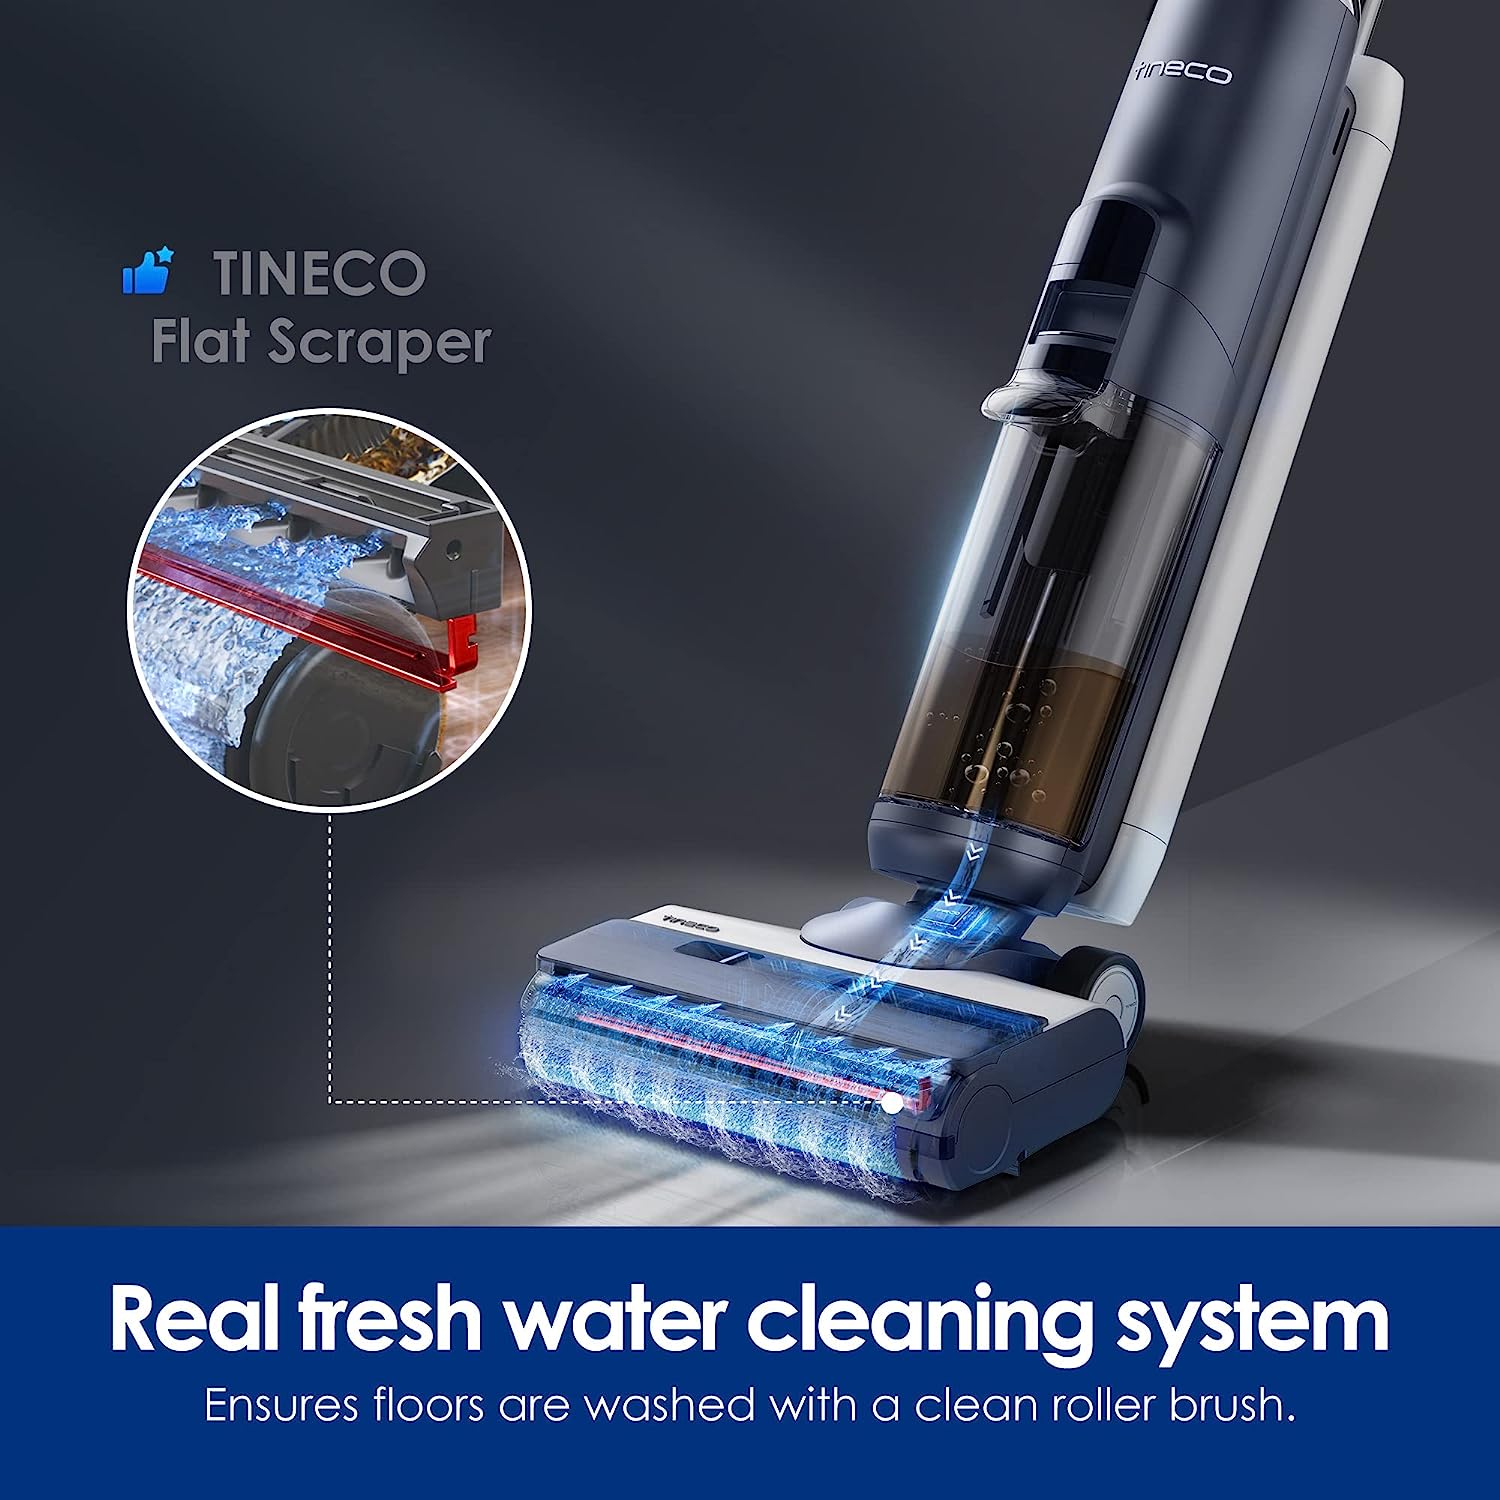 Tineco Presents the FLOOR ONE S7 Steam - the 3-in-1 Cleaning